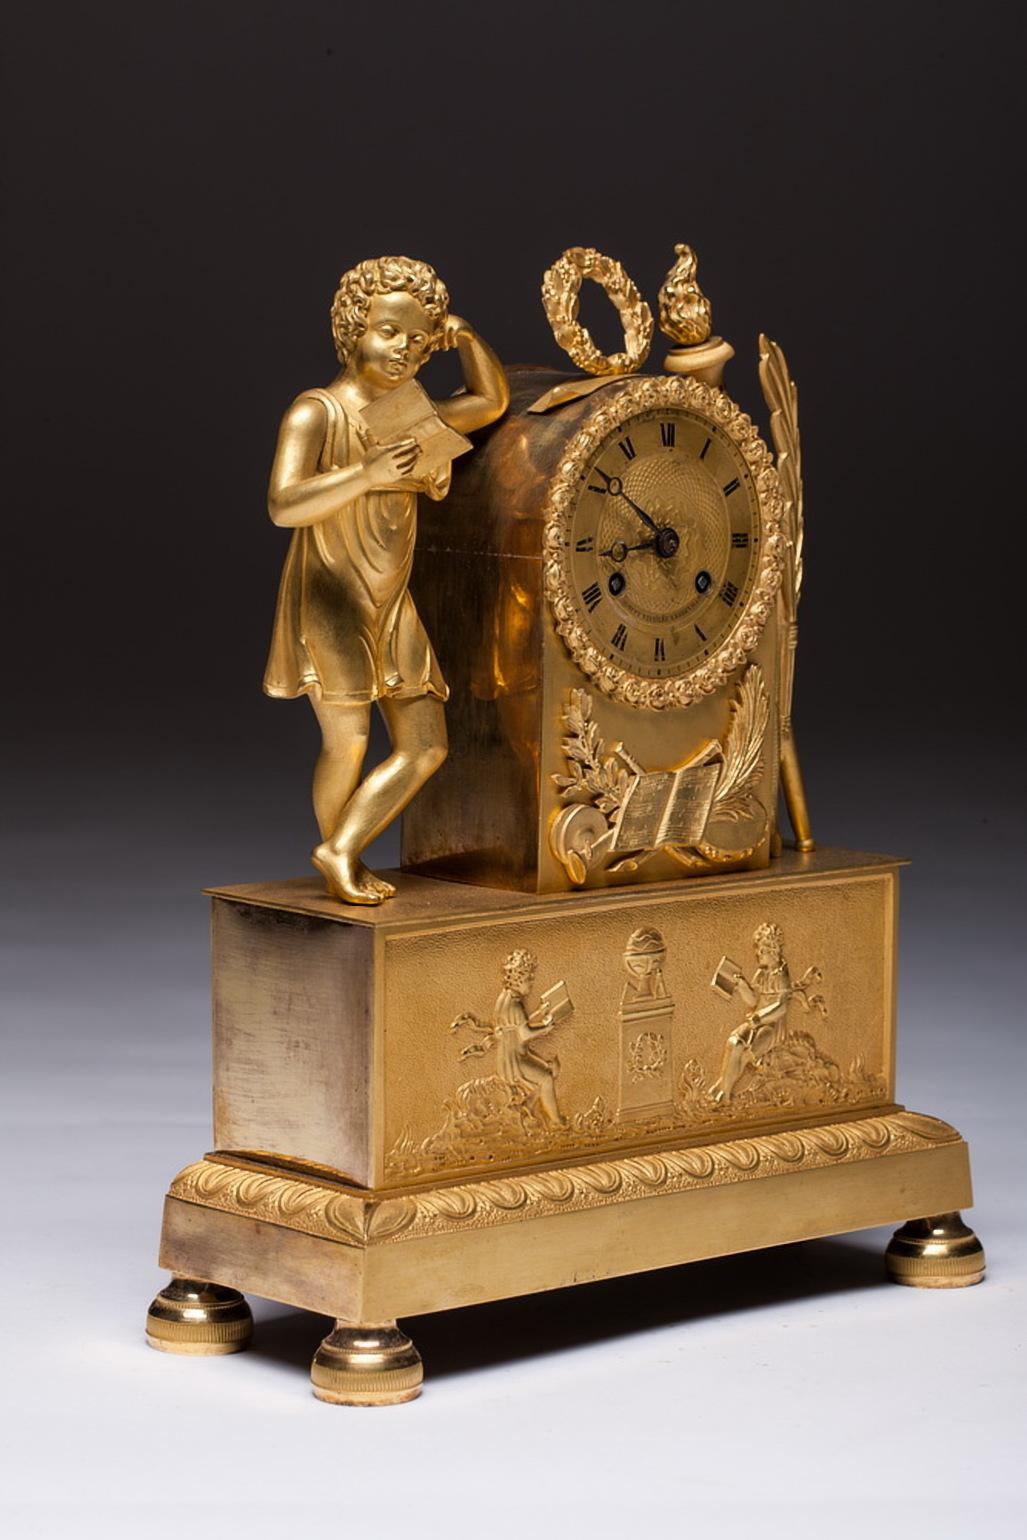 A French antique Empire gilt bronze mantel clock. A clock with a neoclassical figure that symbolizes science.

A figure in one of his watches read the book of a flaming tortoise and laurel on the other side. The clock mechanism is decorated with a